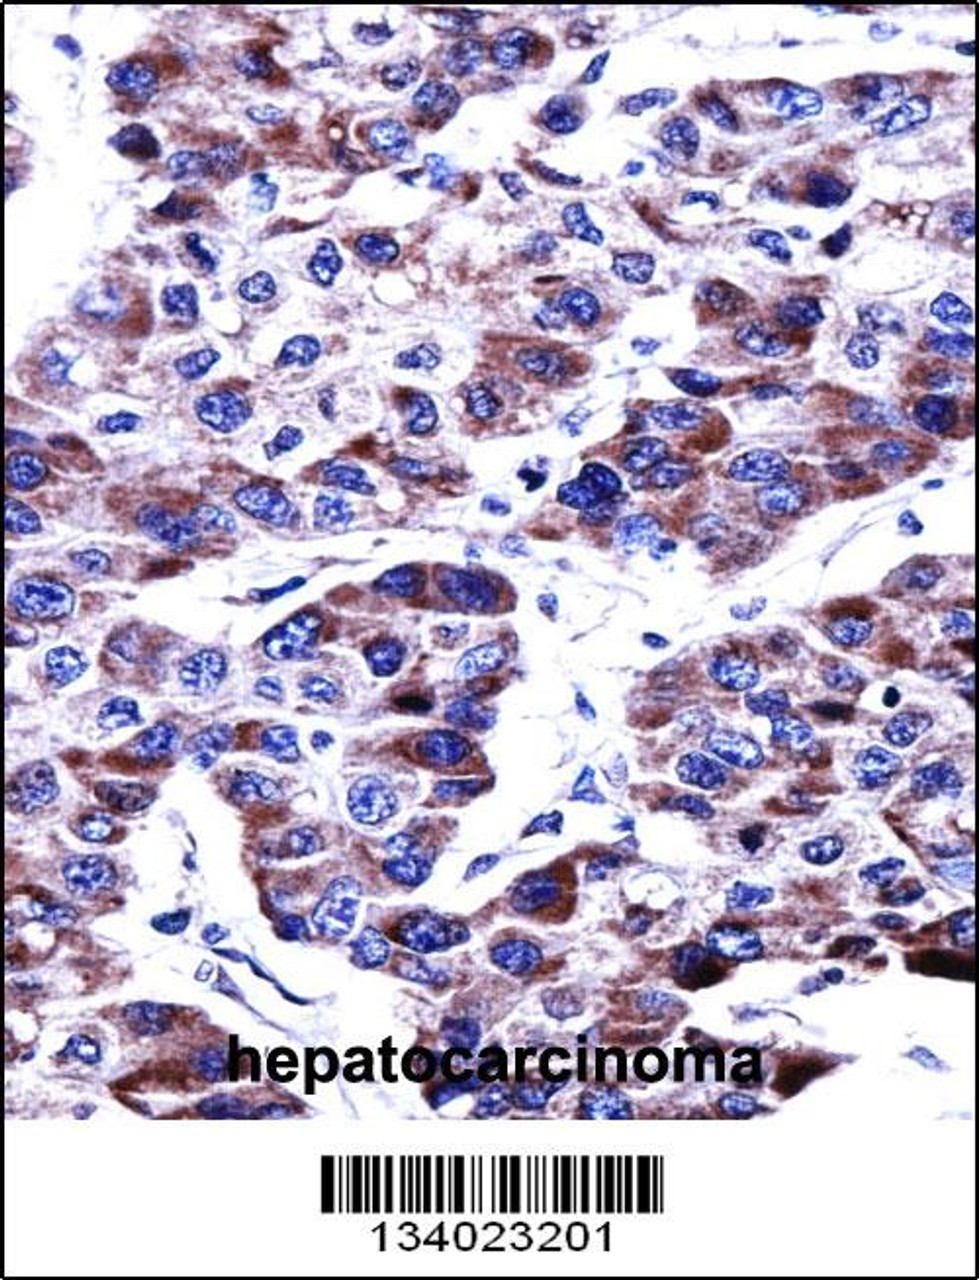 DUSP9 Antibody immunohistochemistry analysis in formalin fixed and paraffin embedded human hepatocarcinoma followed by peroxidase conjugation of the secondary antibody and DAB staining.